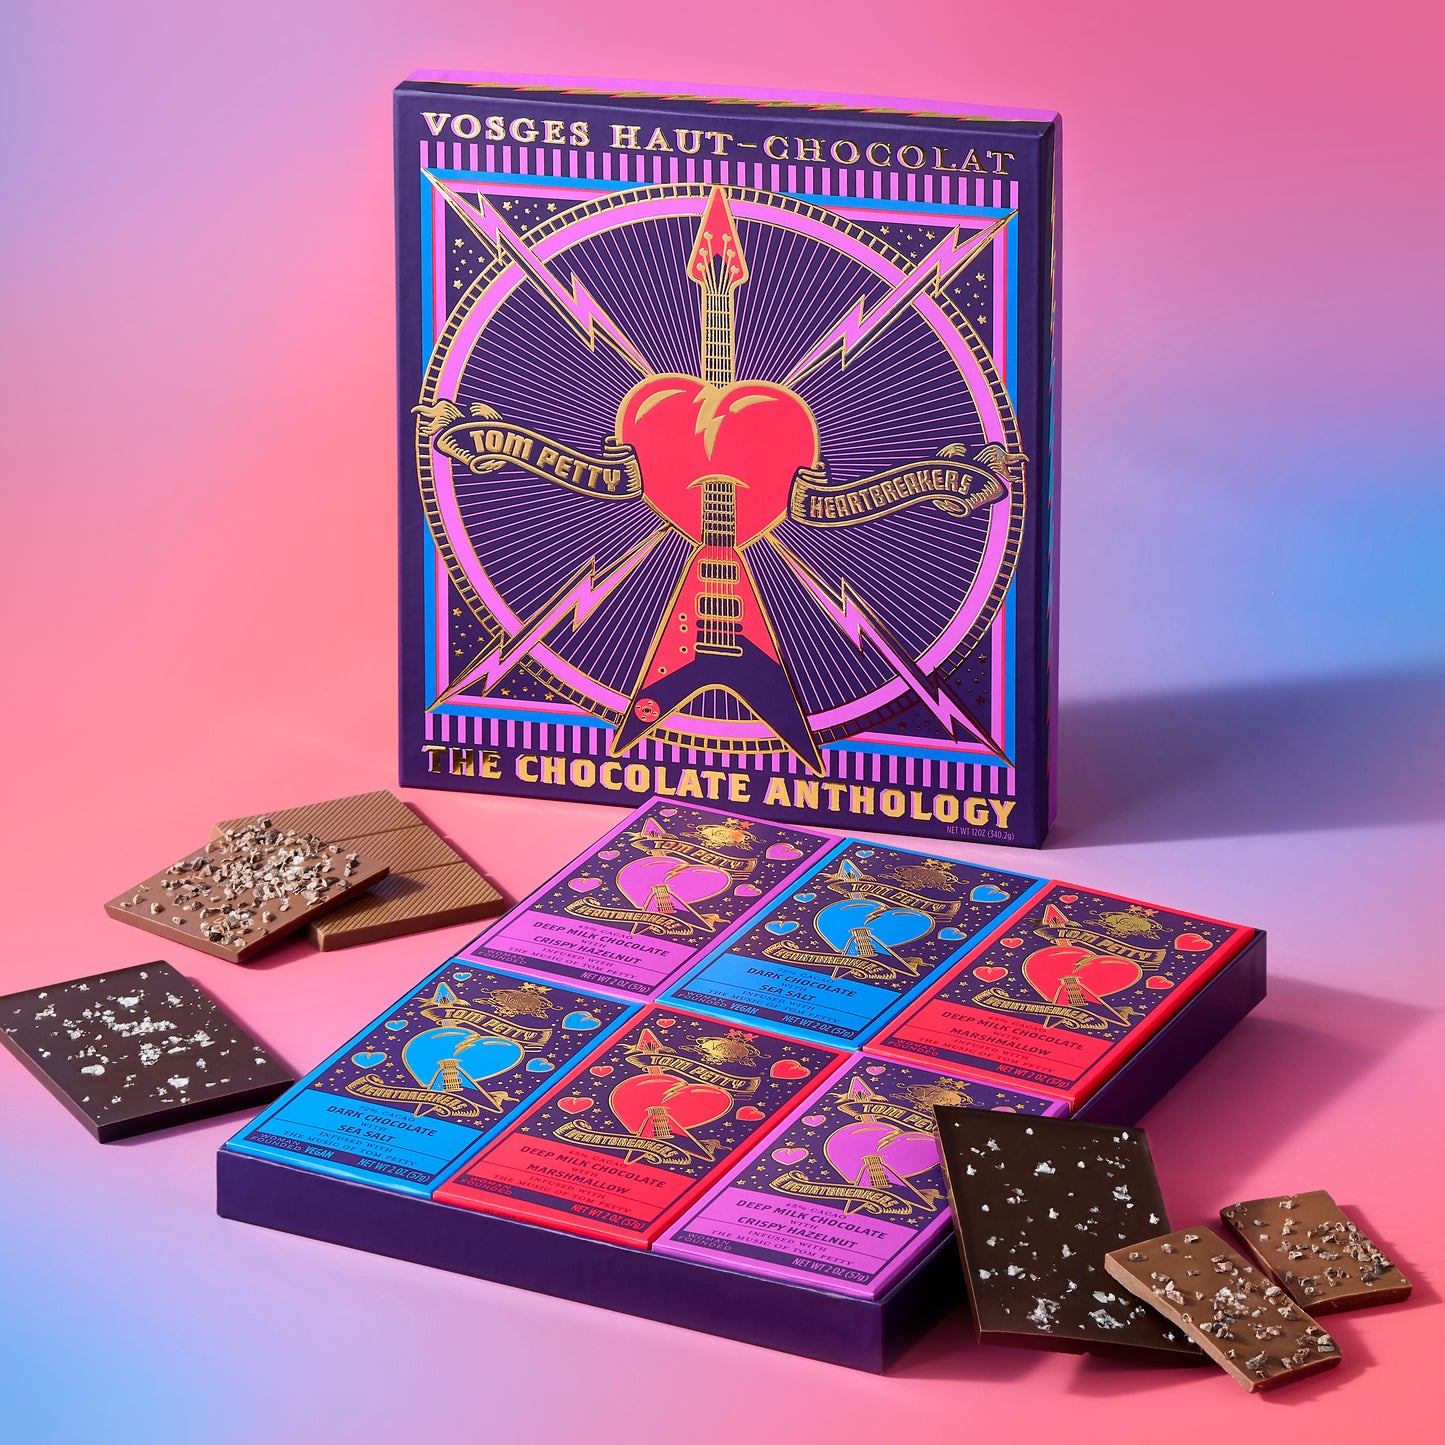 Tom Petty x Vosges Limited Edition Chocolate Bar Gift Set